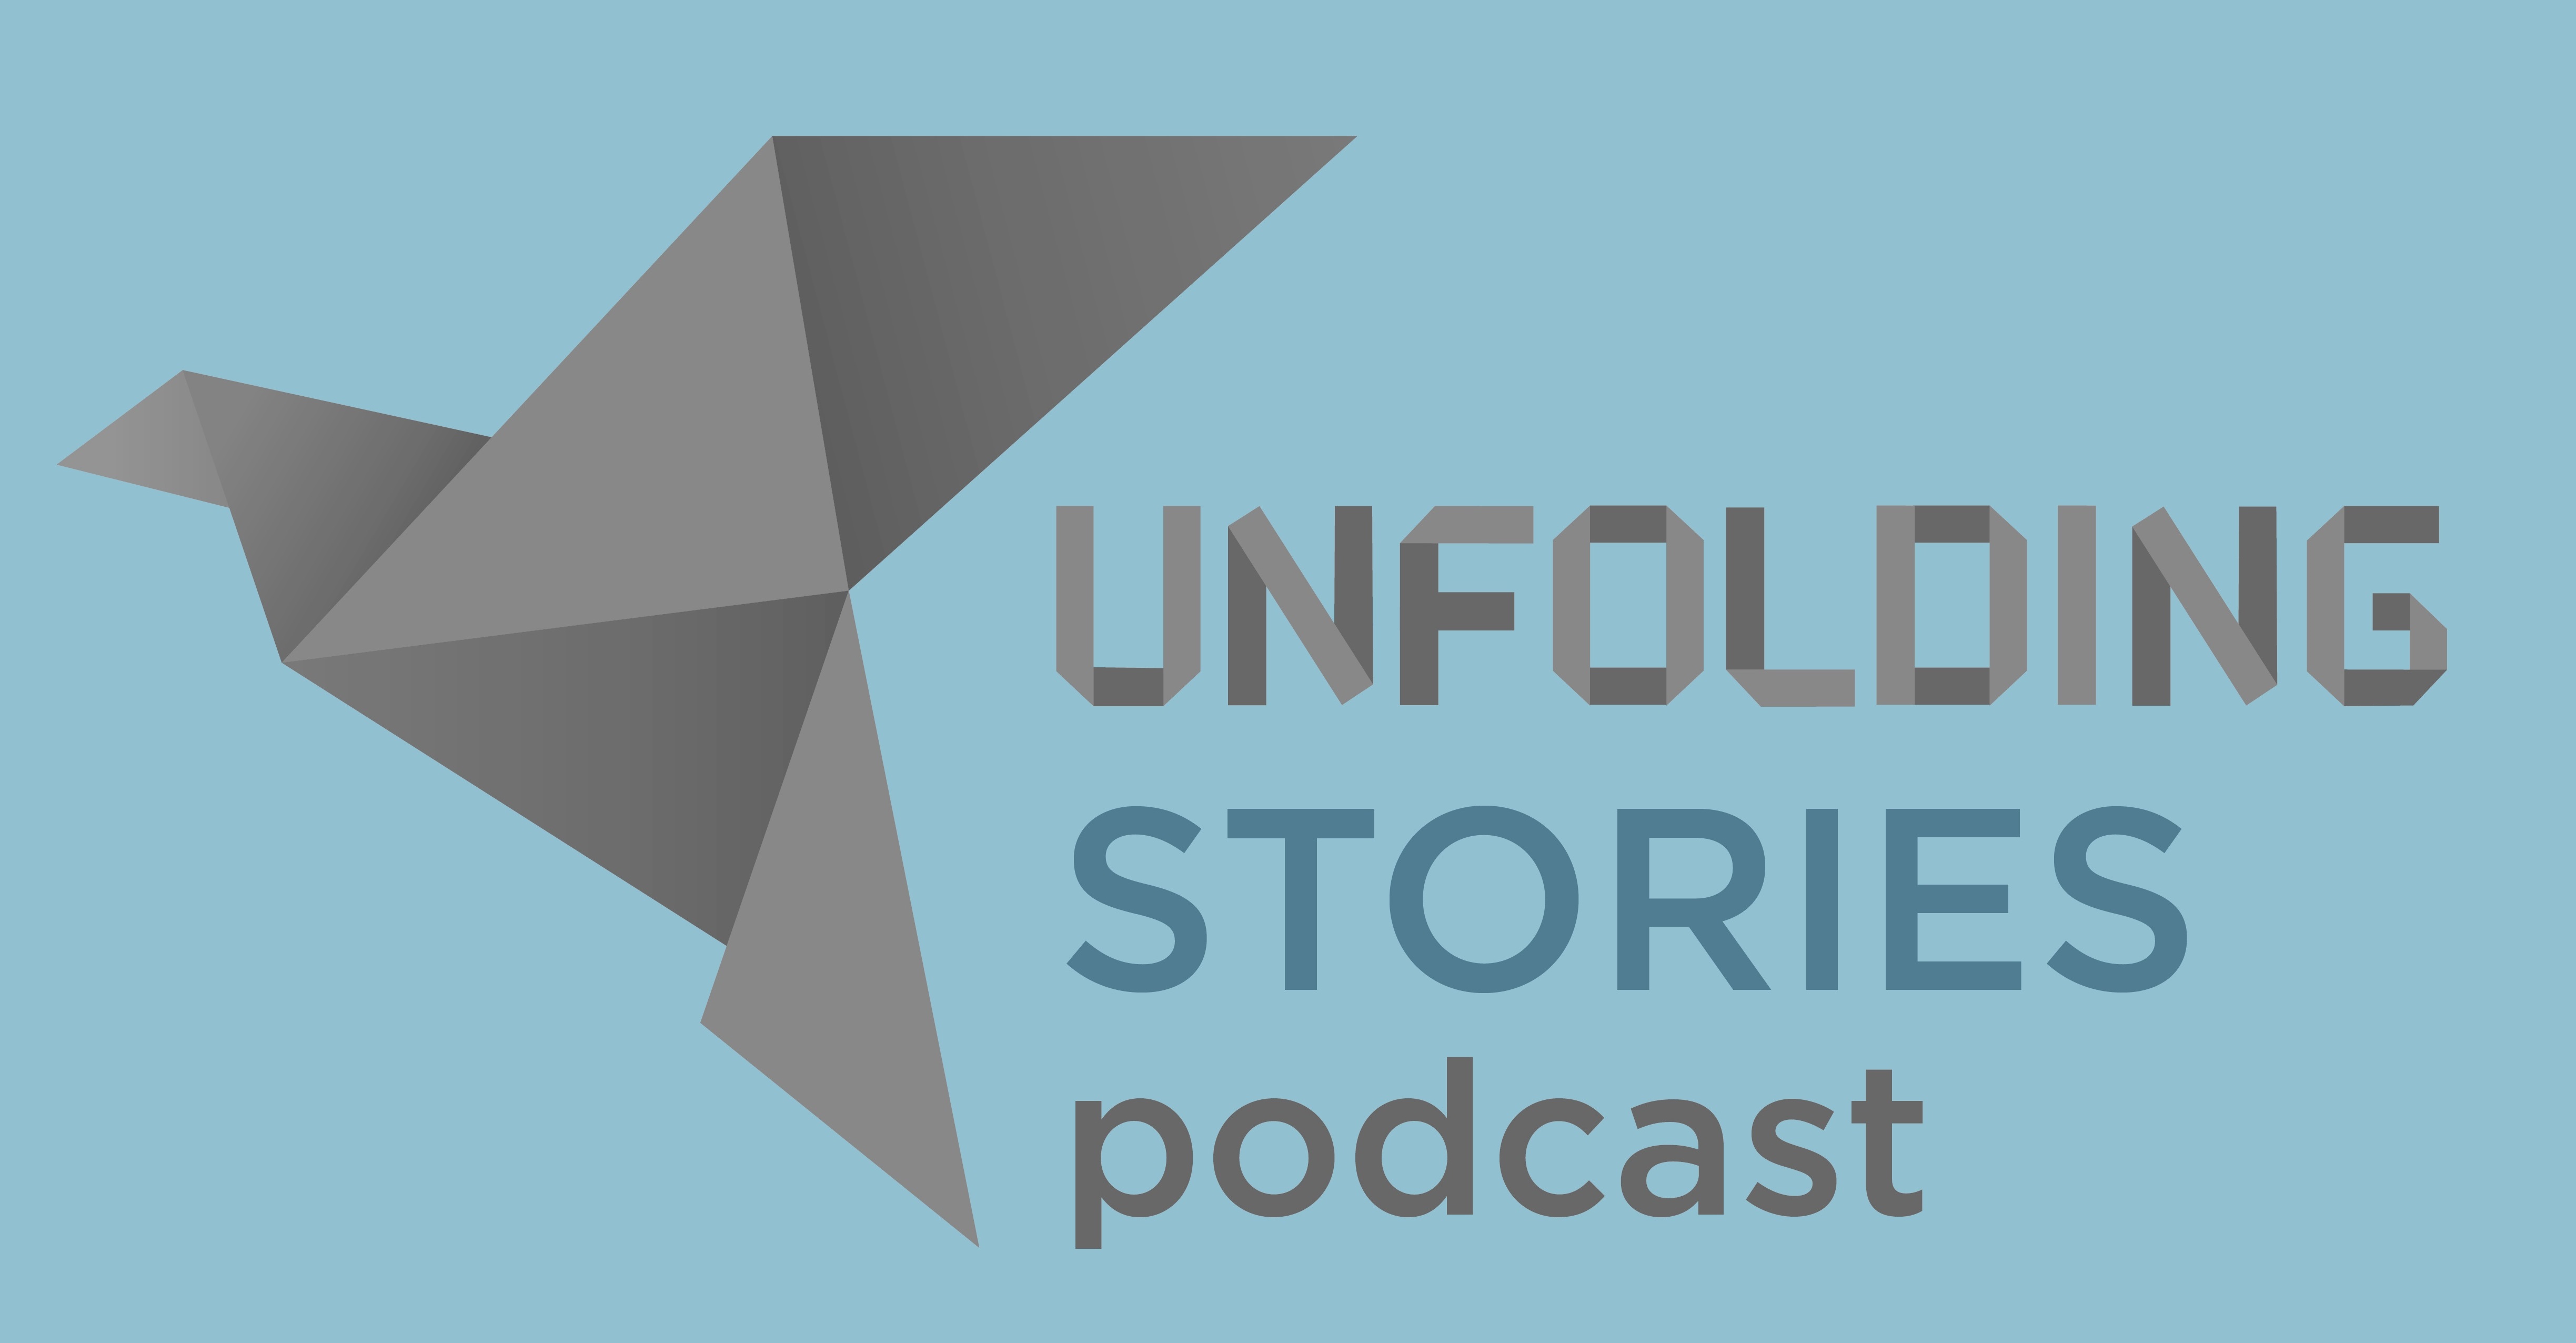 Unfolding Stories Podcast Episode Four: The Long Road Home.